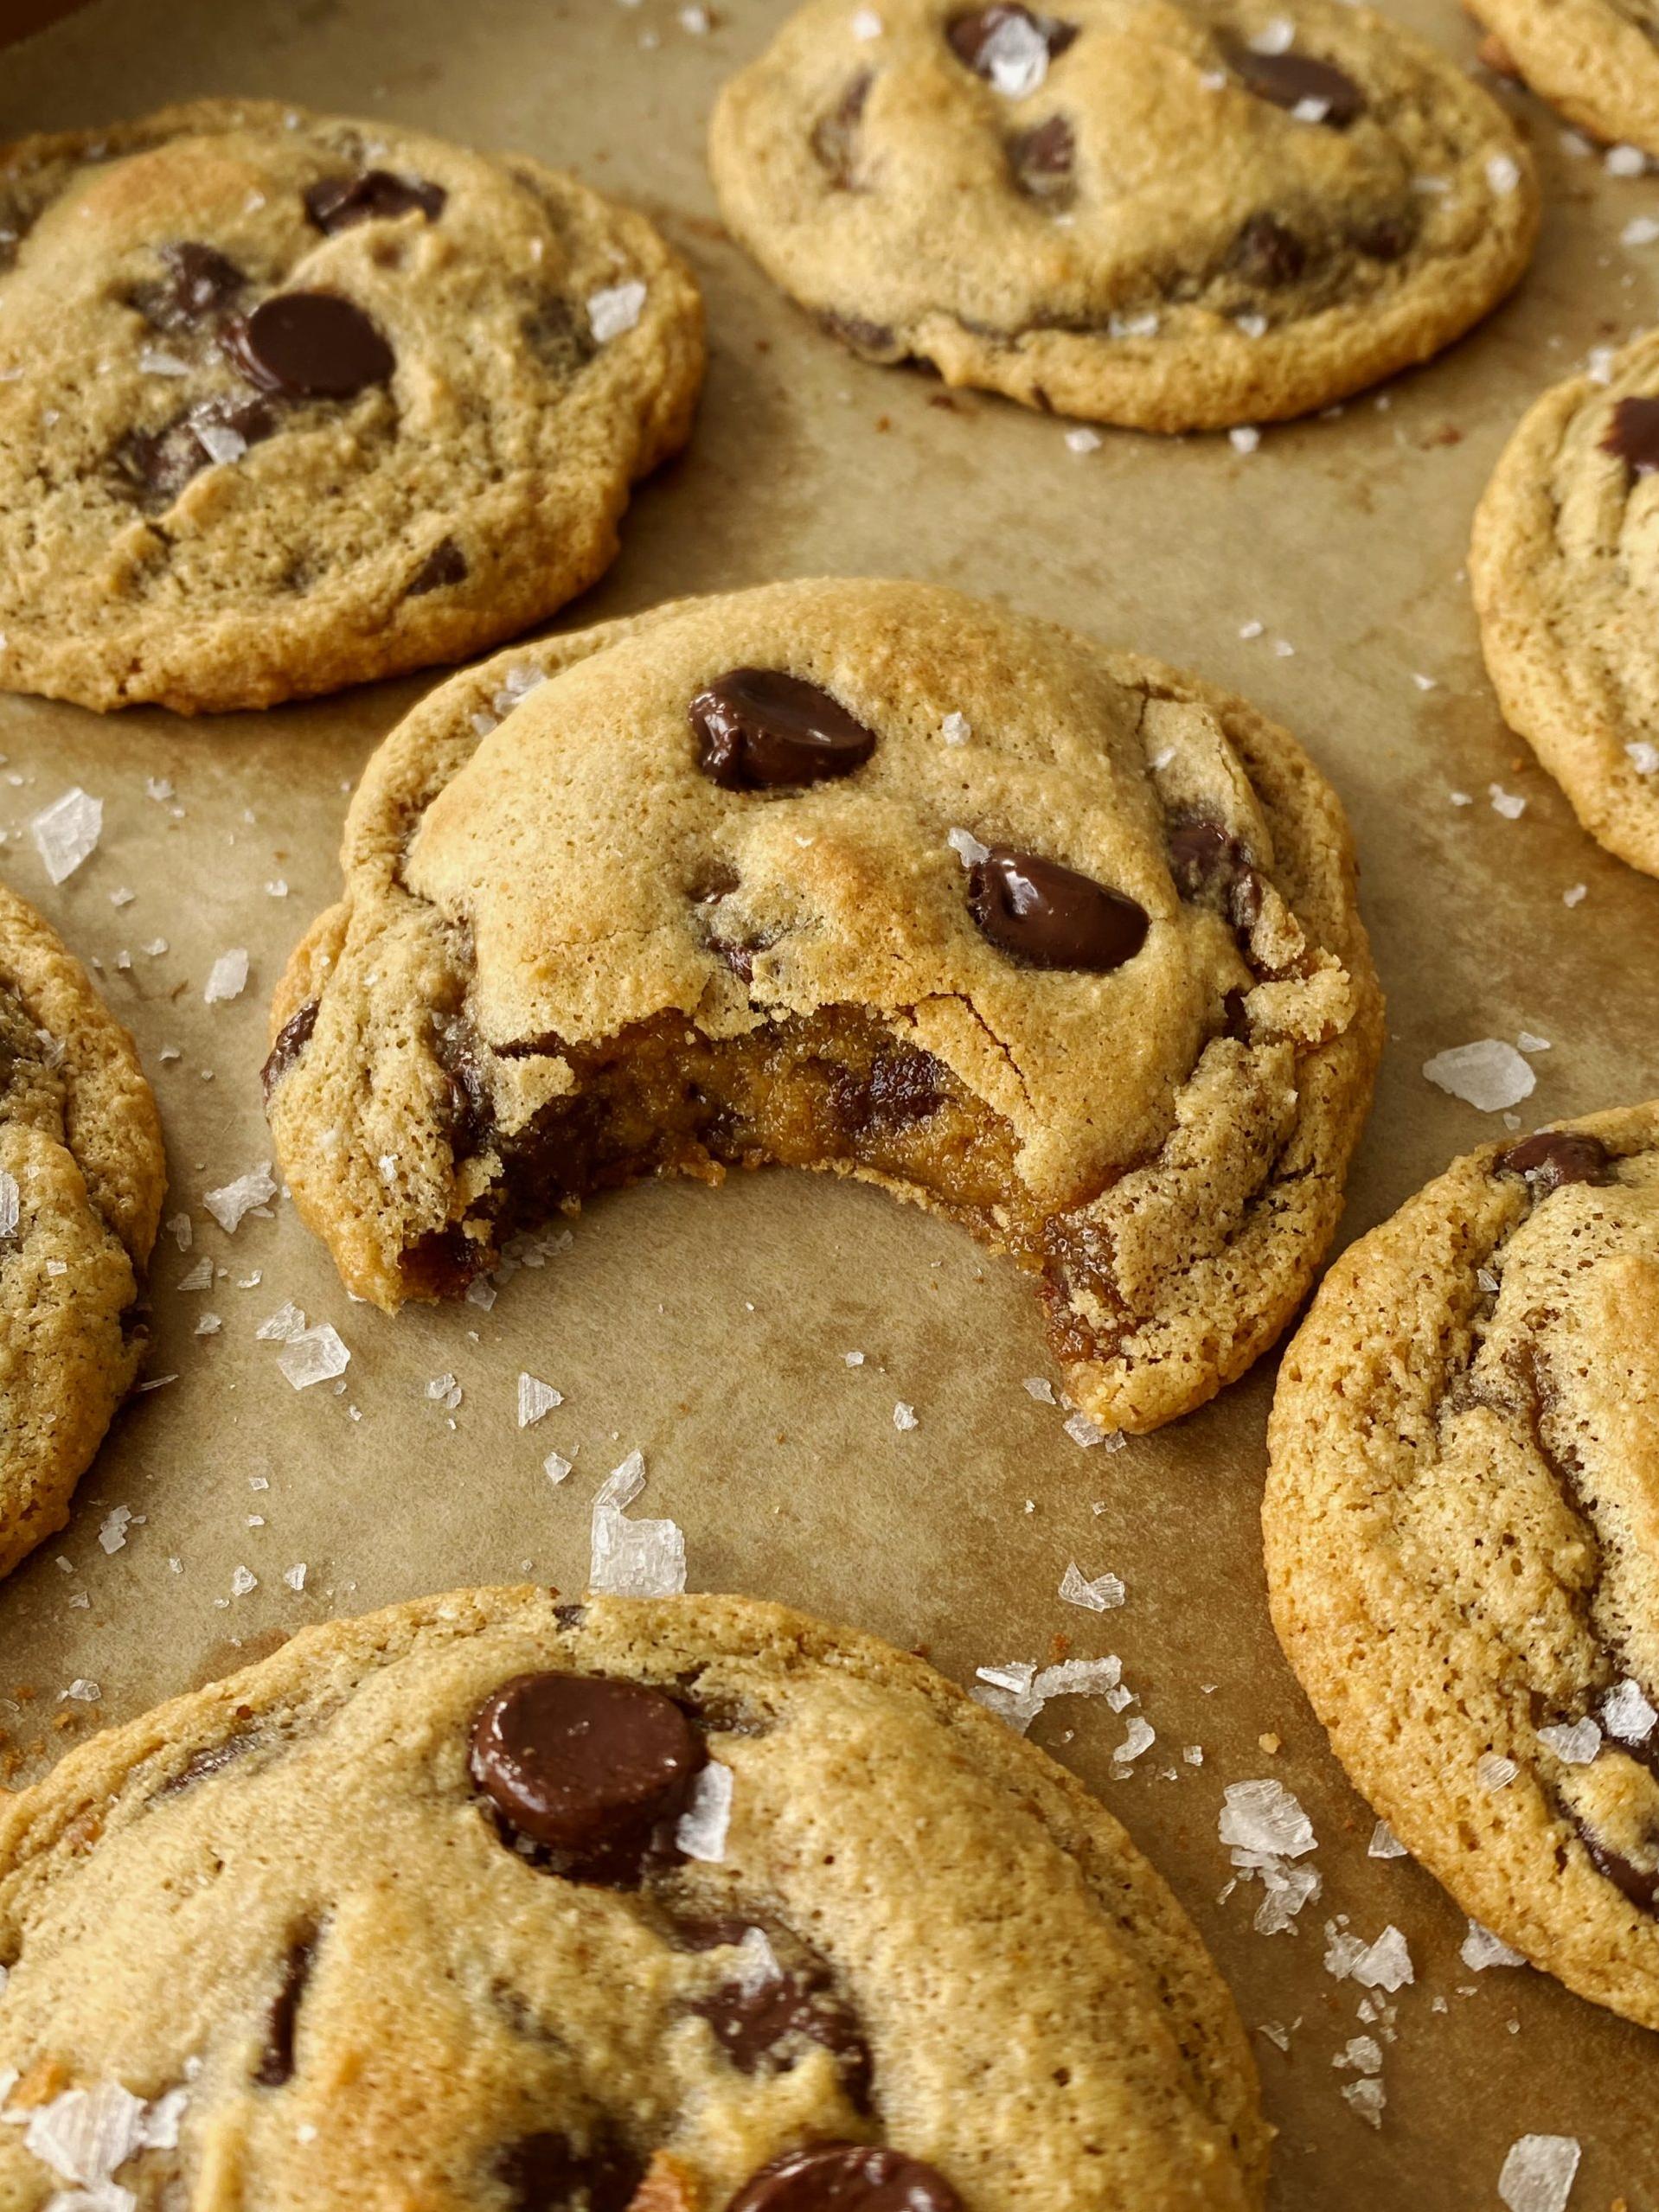  Enjoy a cookie and a pick-me-up, all in one bite.